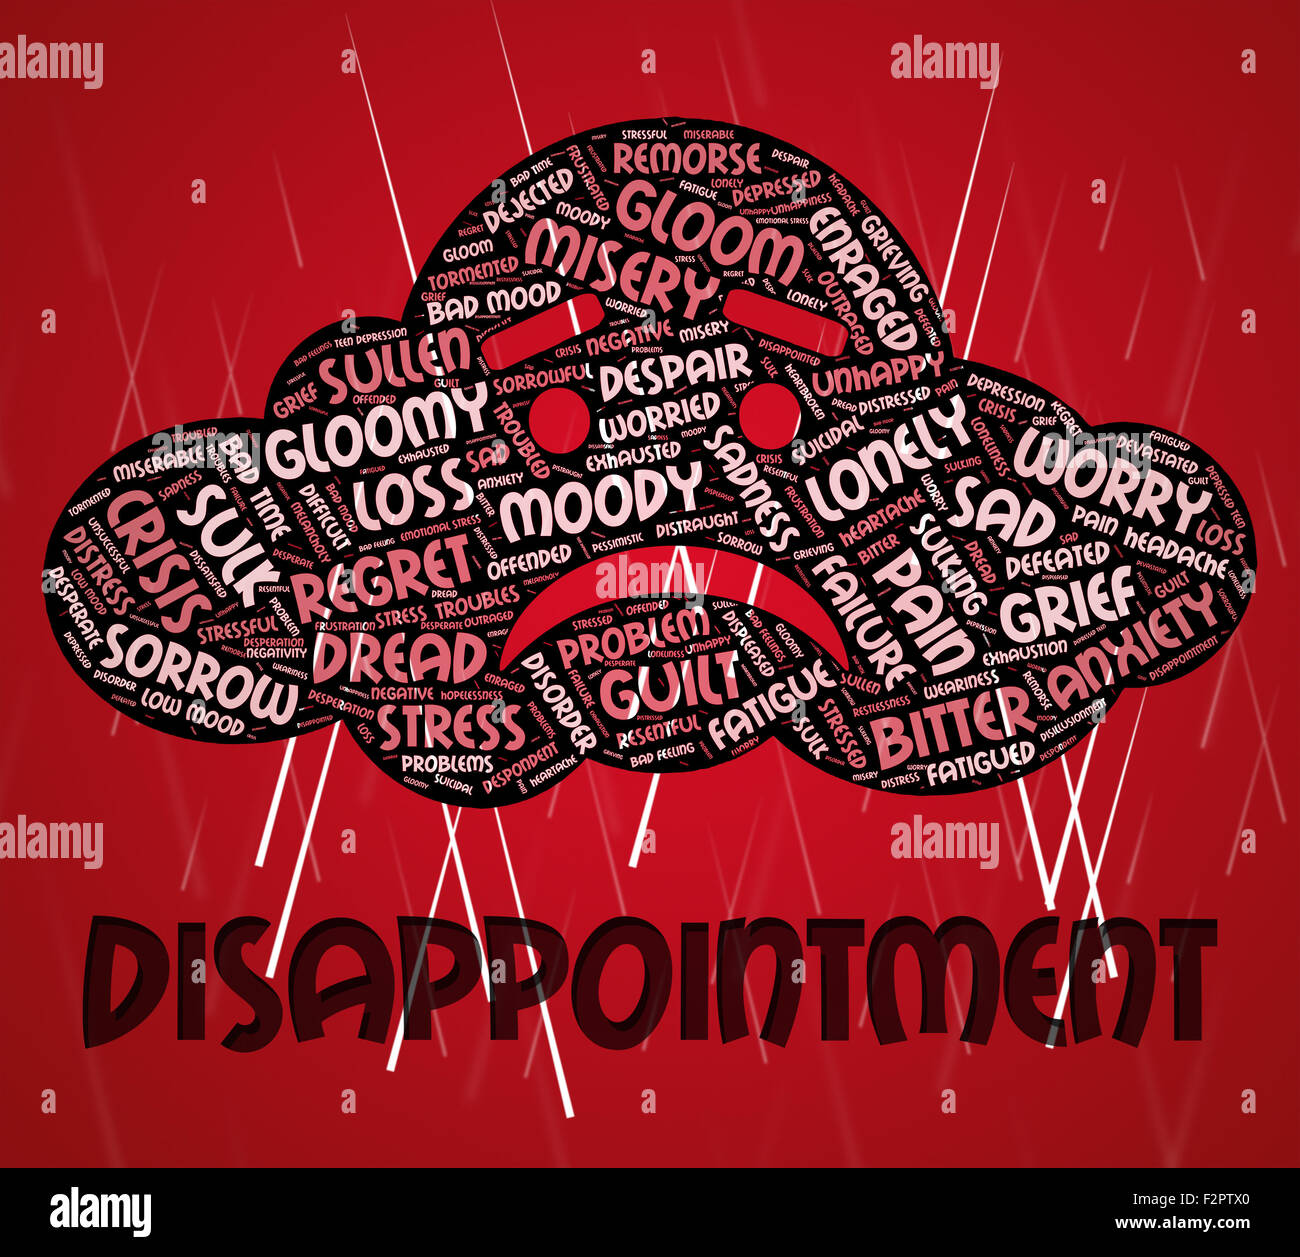 Disappointment Word Meaning Cast Down And Disillusioned Stock Photo Alamy